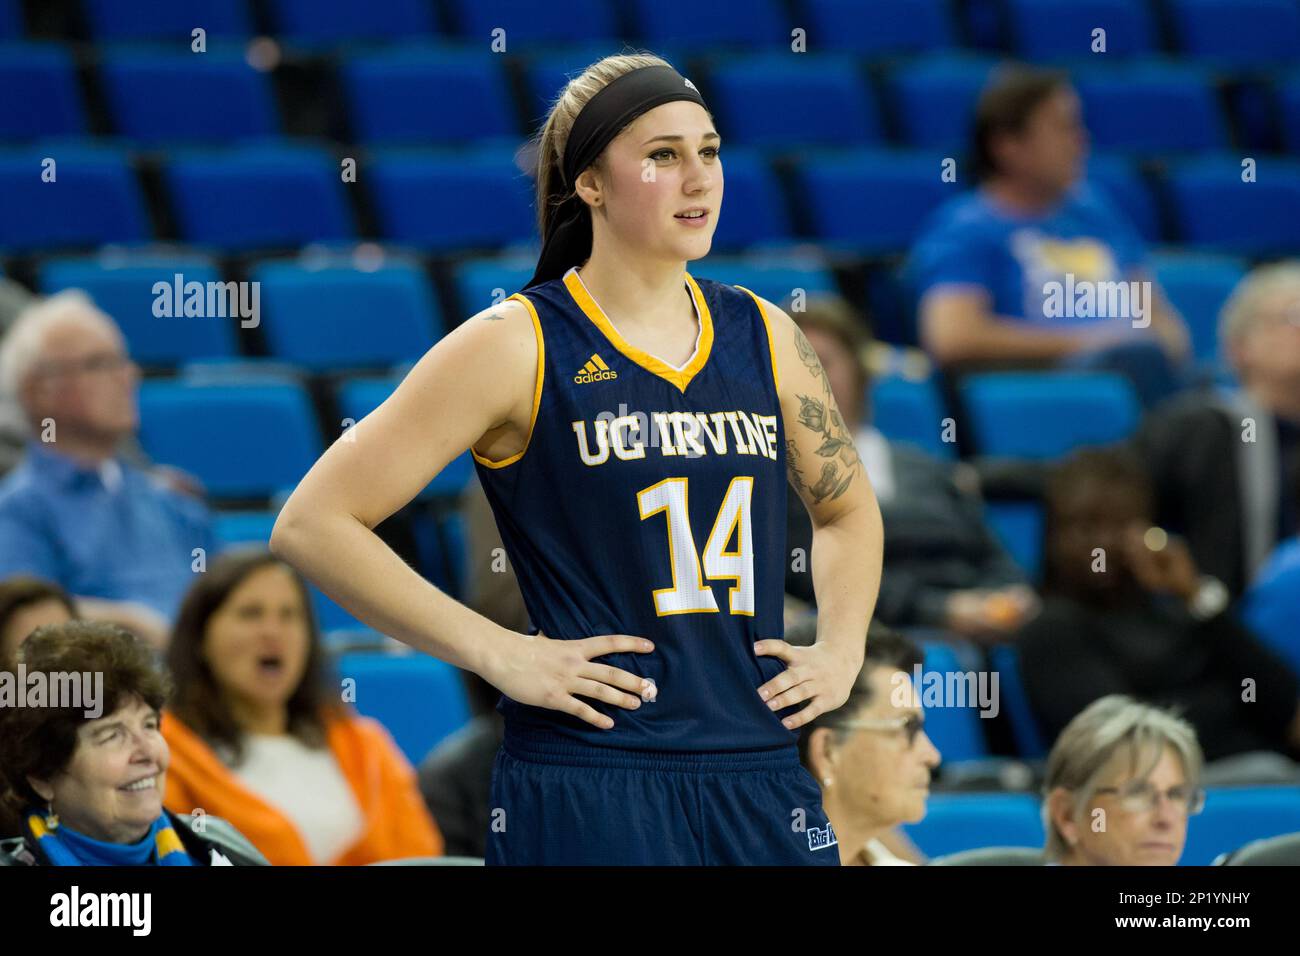 December 16 2015: UC Irvine Anteaters forward Brittany Glassow (14) during  the NCAA Women's Basketball game between UC Irvine and UCLA at Pauley  Pavilion in Los Angeles, CA. (Photo by David Dennis/Icon